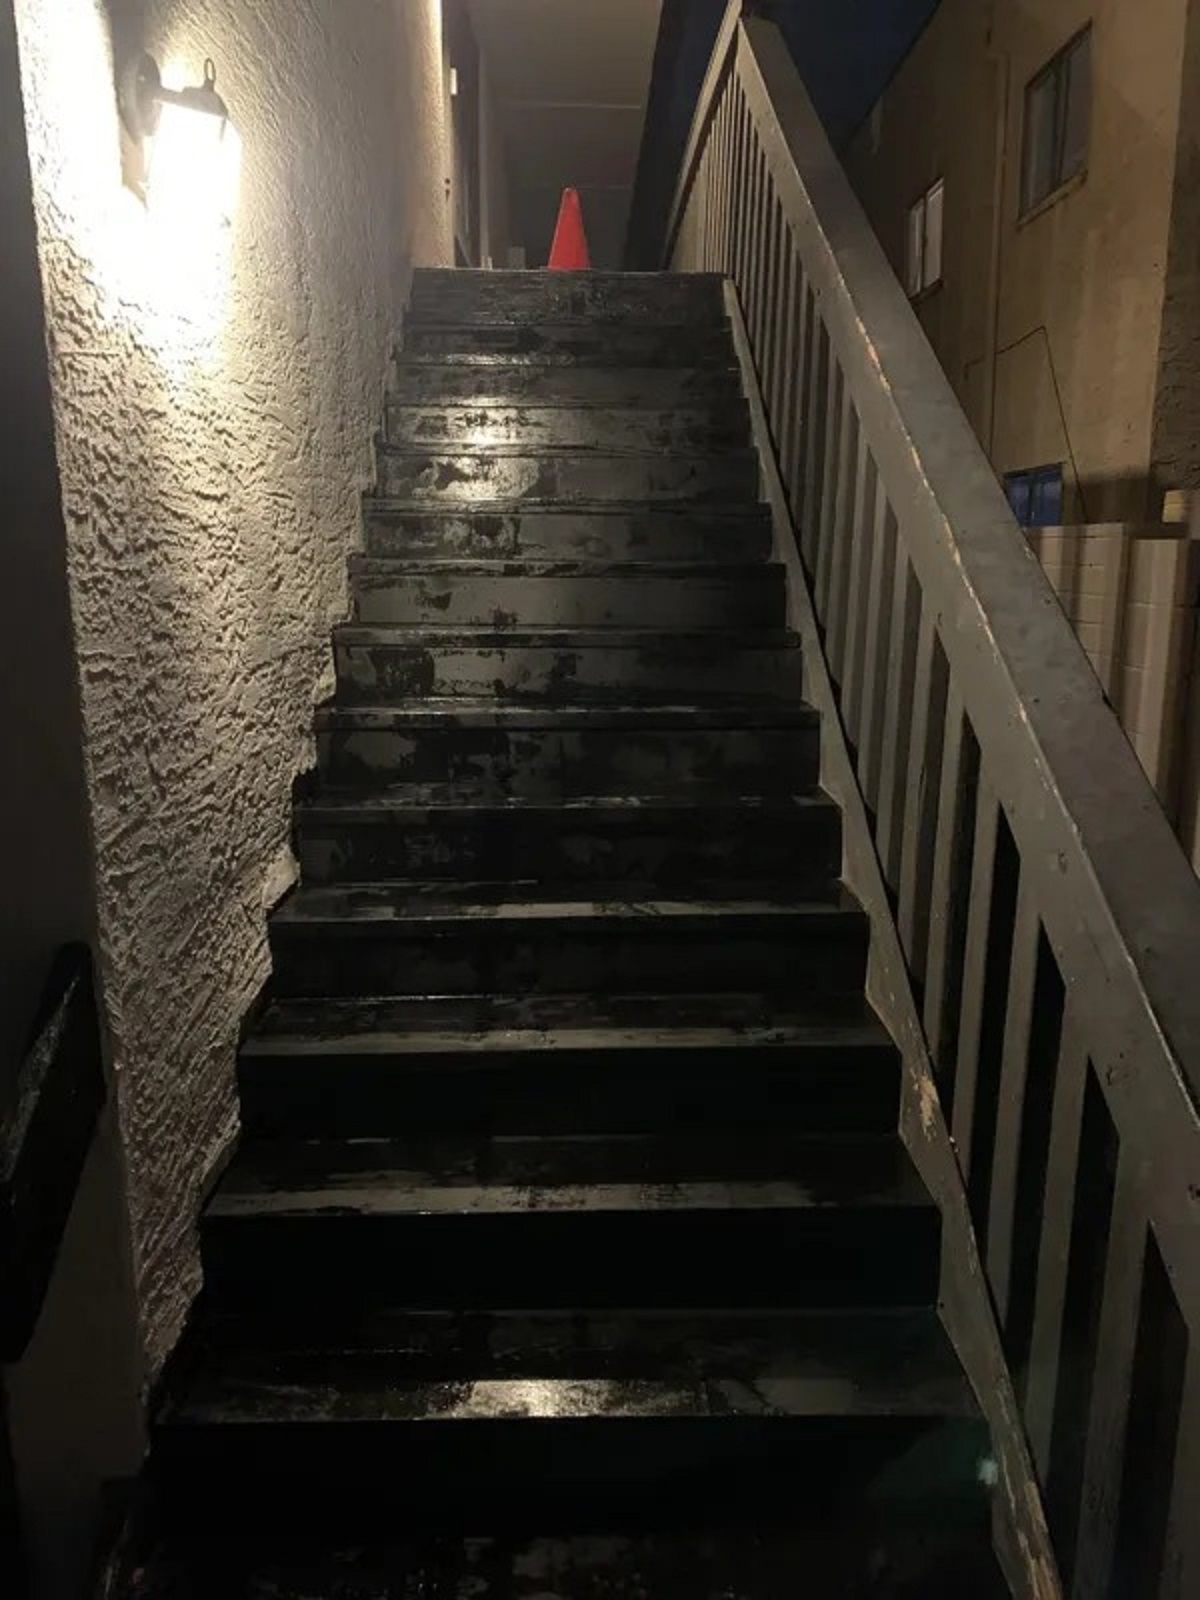 I came back from Thanksgiving to find that my landlord had revarnished/painted the stairs up to my apartment. They are still wet, I was given no notice, and there is only one staircase.